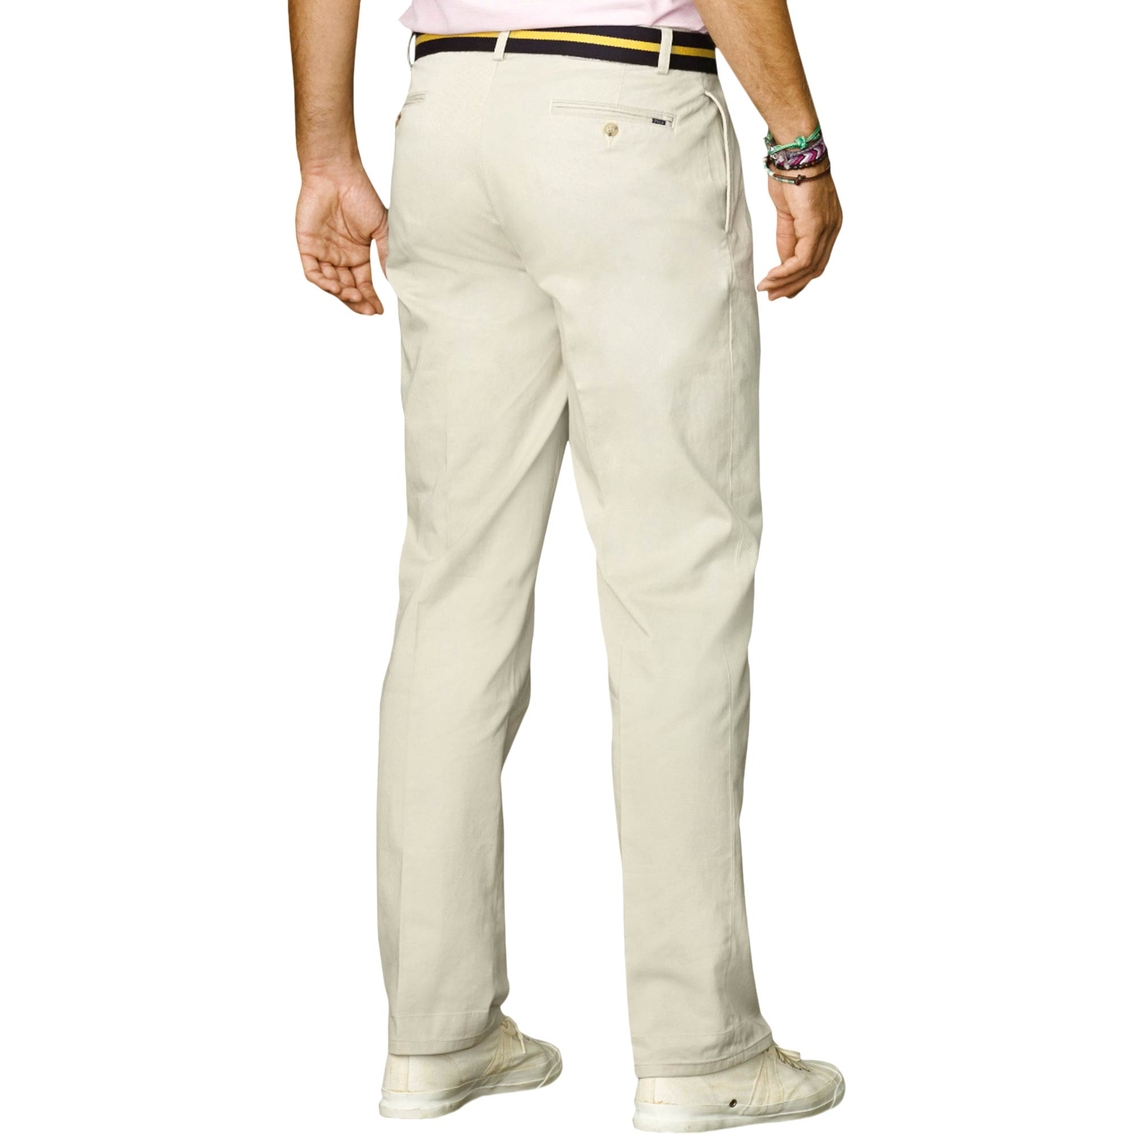 Polo Ralph Lauren Big & Tall Classic Fit Pleated Chino Pants - Image 2 of 2